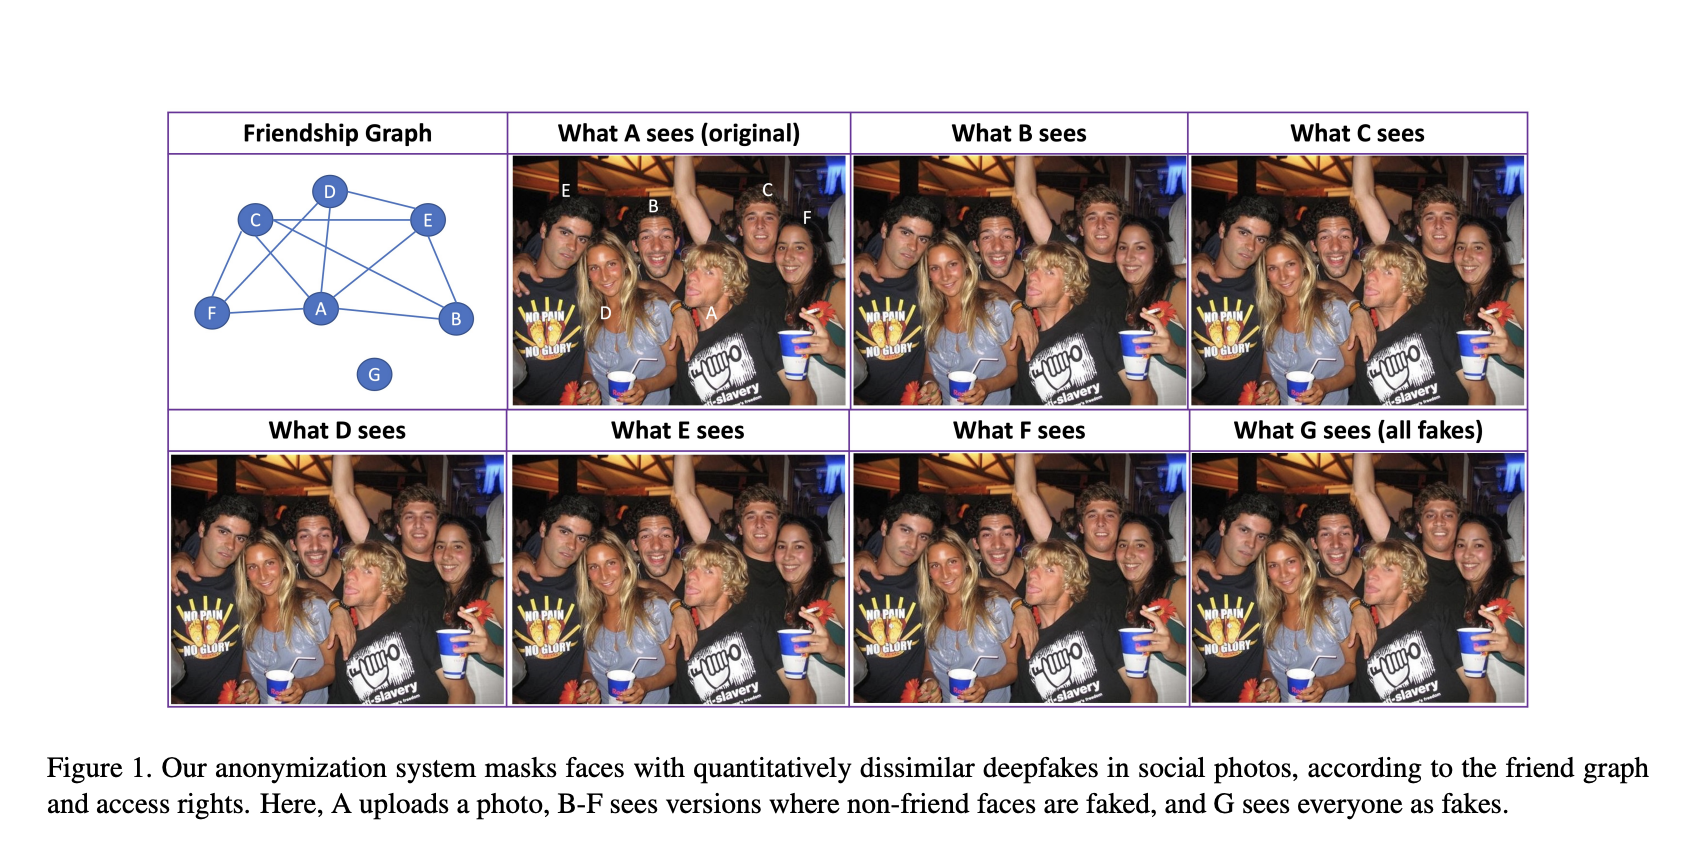 Researchers From Binghamton University Introduce A Privacy-Enhancing Anonymization System (My Face, My Choice) For Everyone To Have Control Over Their Faces In Social Photo Sharing Networks